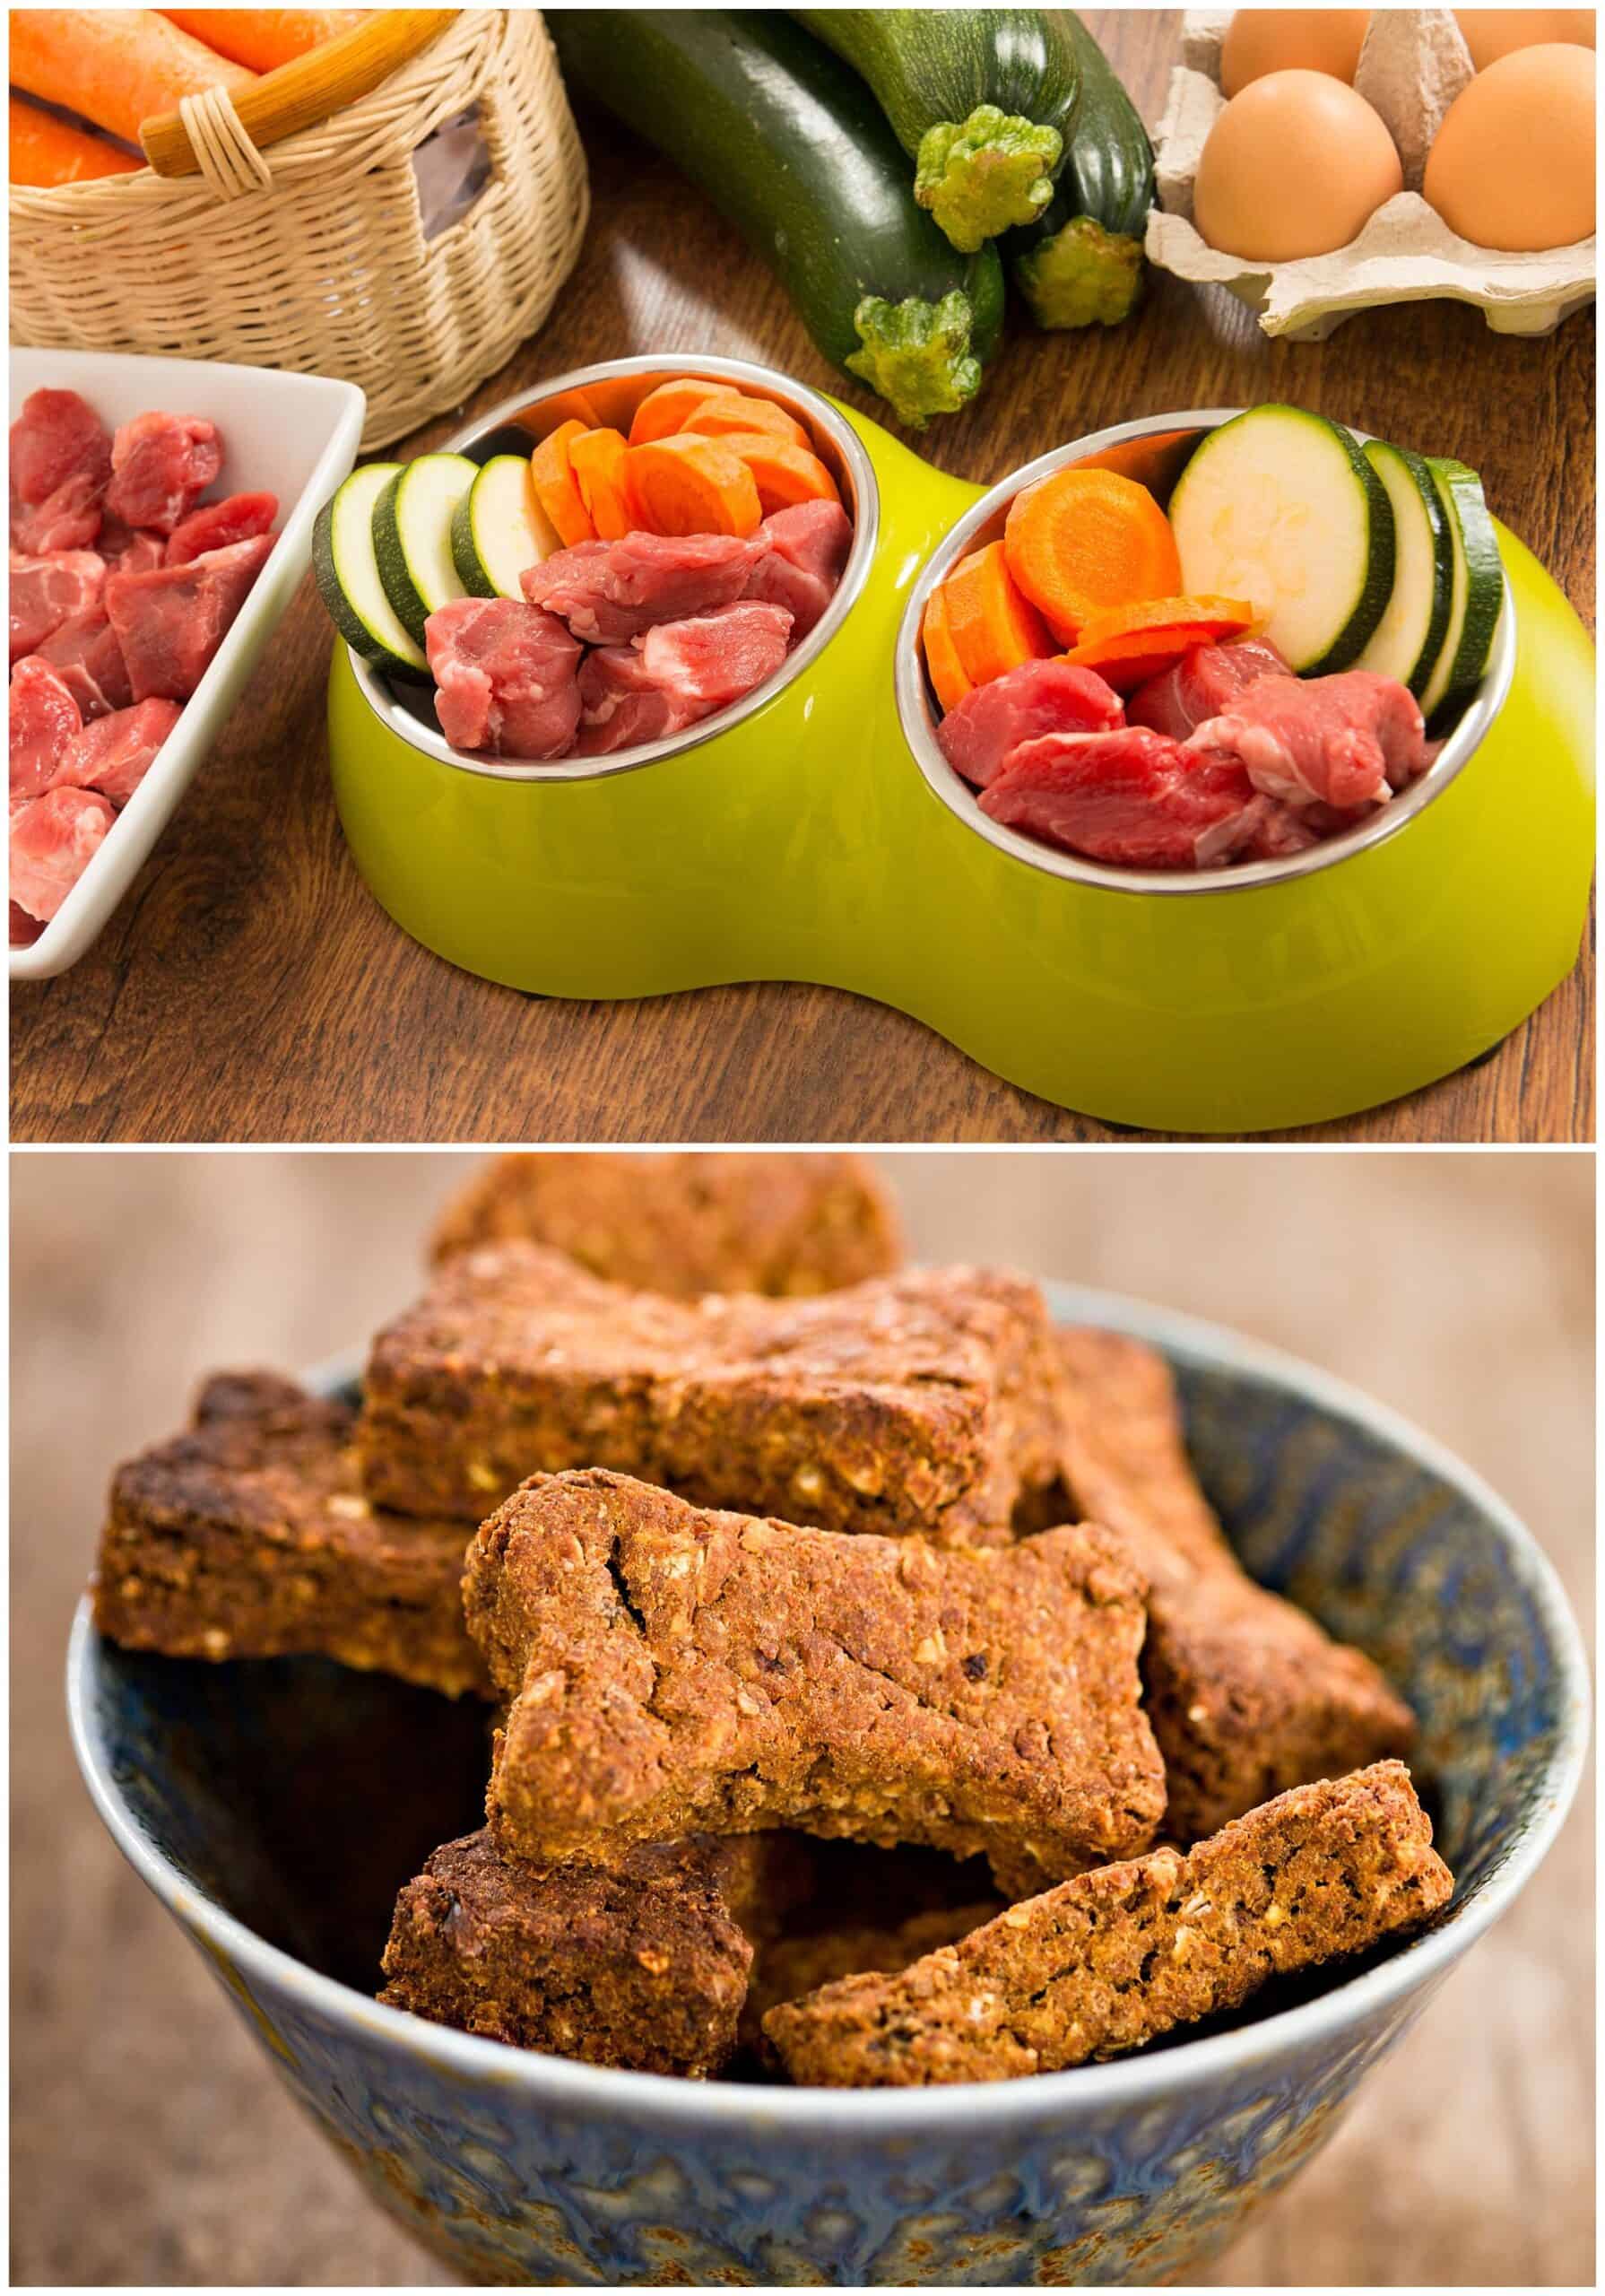 healthy ingredients to use in homemade dog treats, including lean meat, vegetables, and fruit